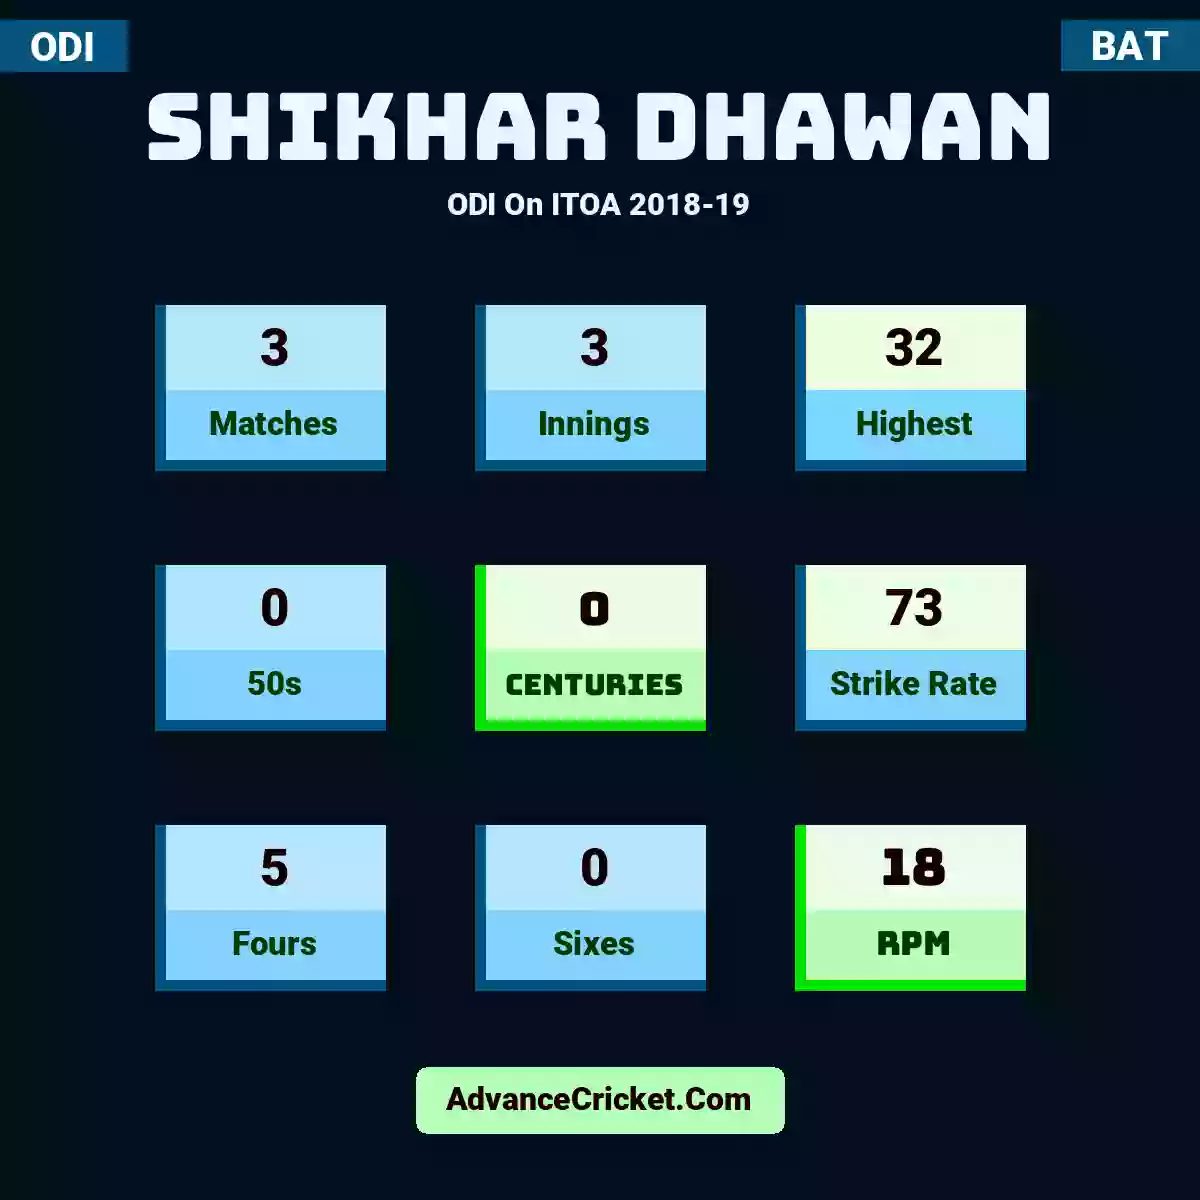 Shikhar Dhawan ODI  On ITOA 2018-19, Shikhar Dhawan played 3 matches, scored 32 runs as highest, 0 half-centuries, and 0 centuries, with a strike rate of 73. S.Dhawan hit 5 fours and 0 sixes, with an RPM of 18.